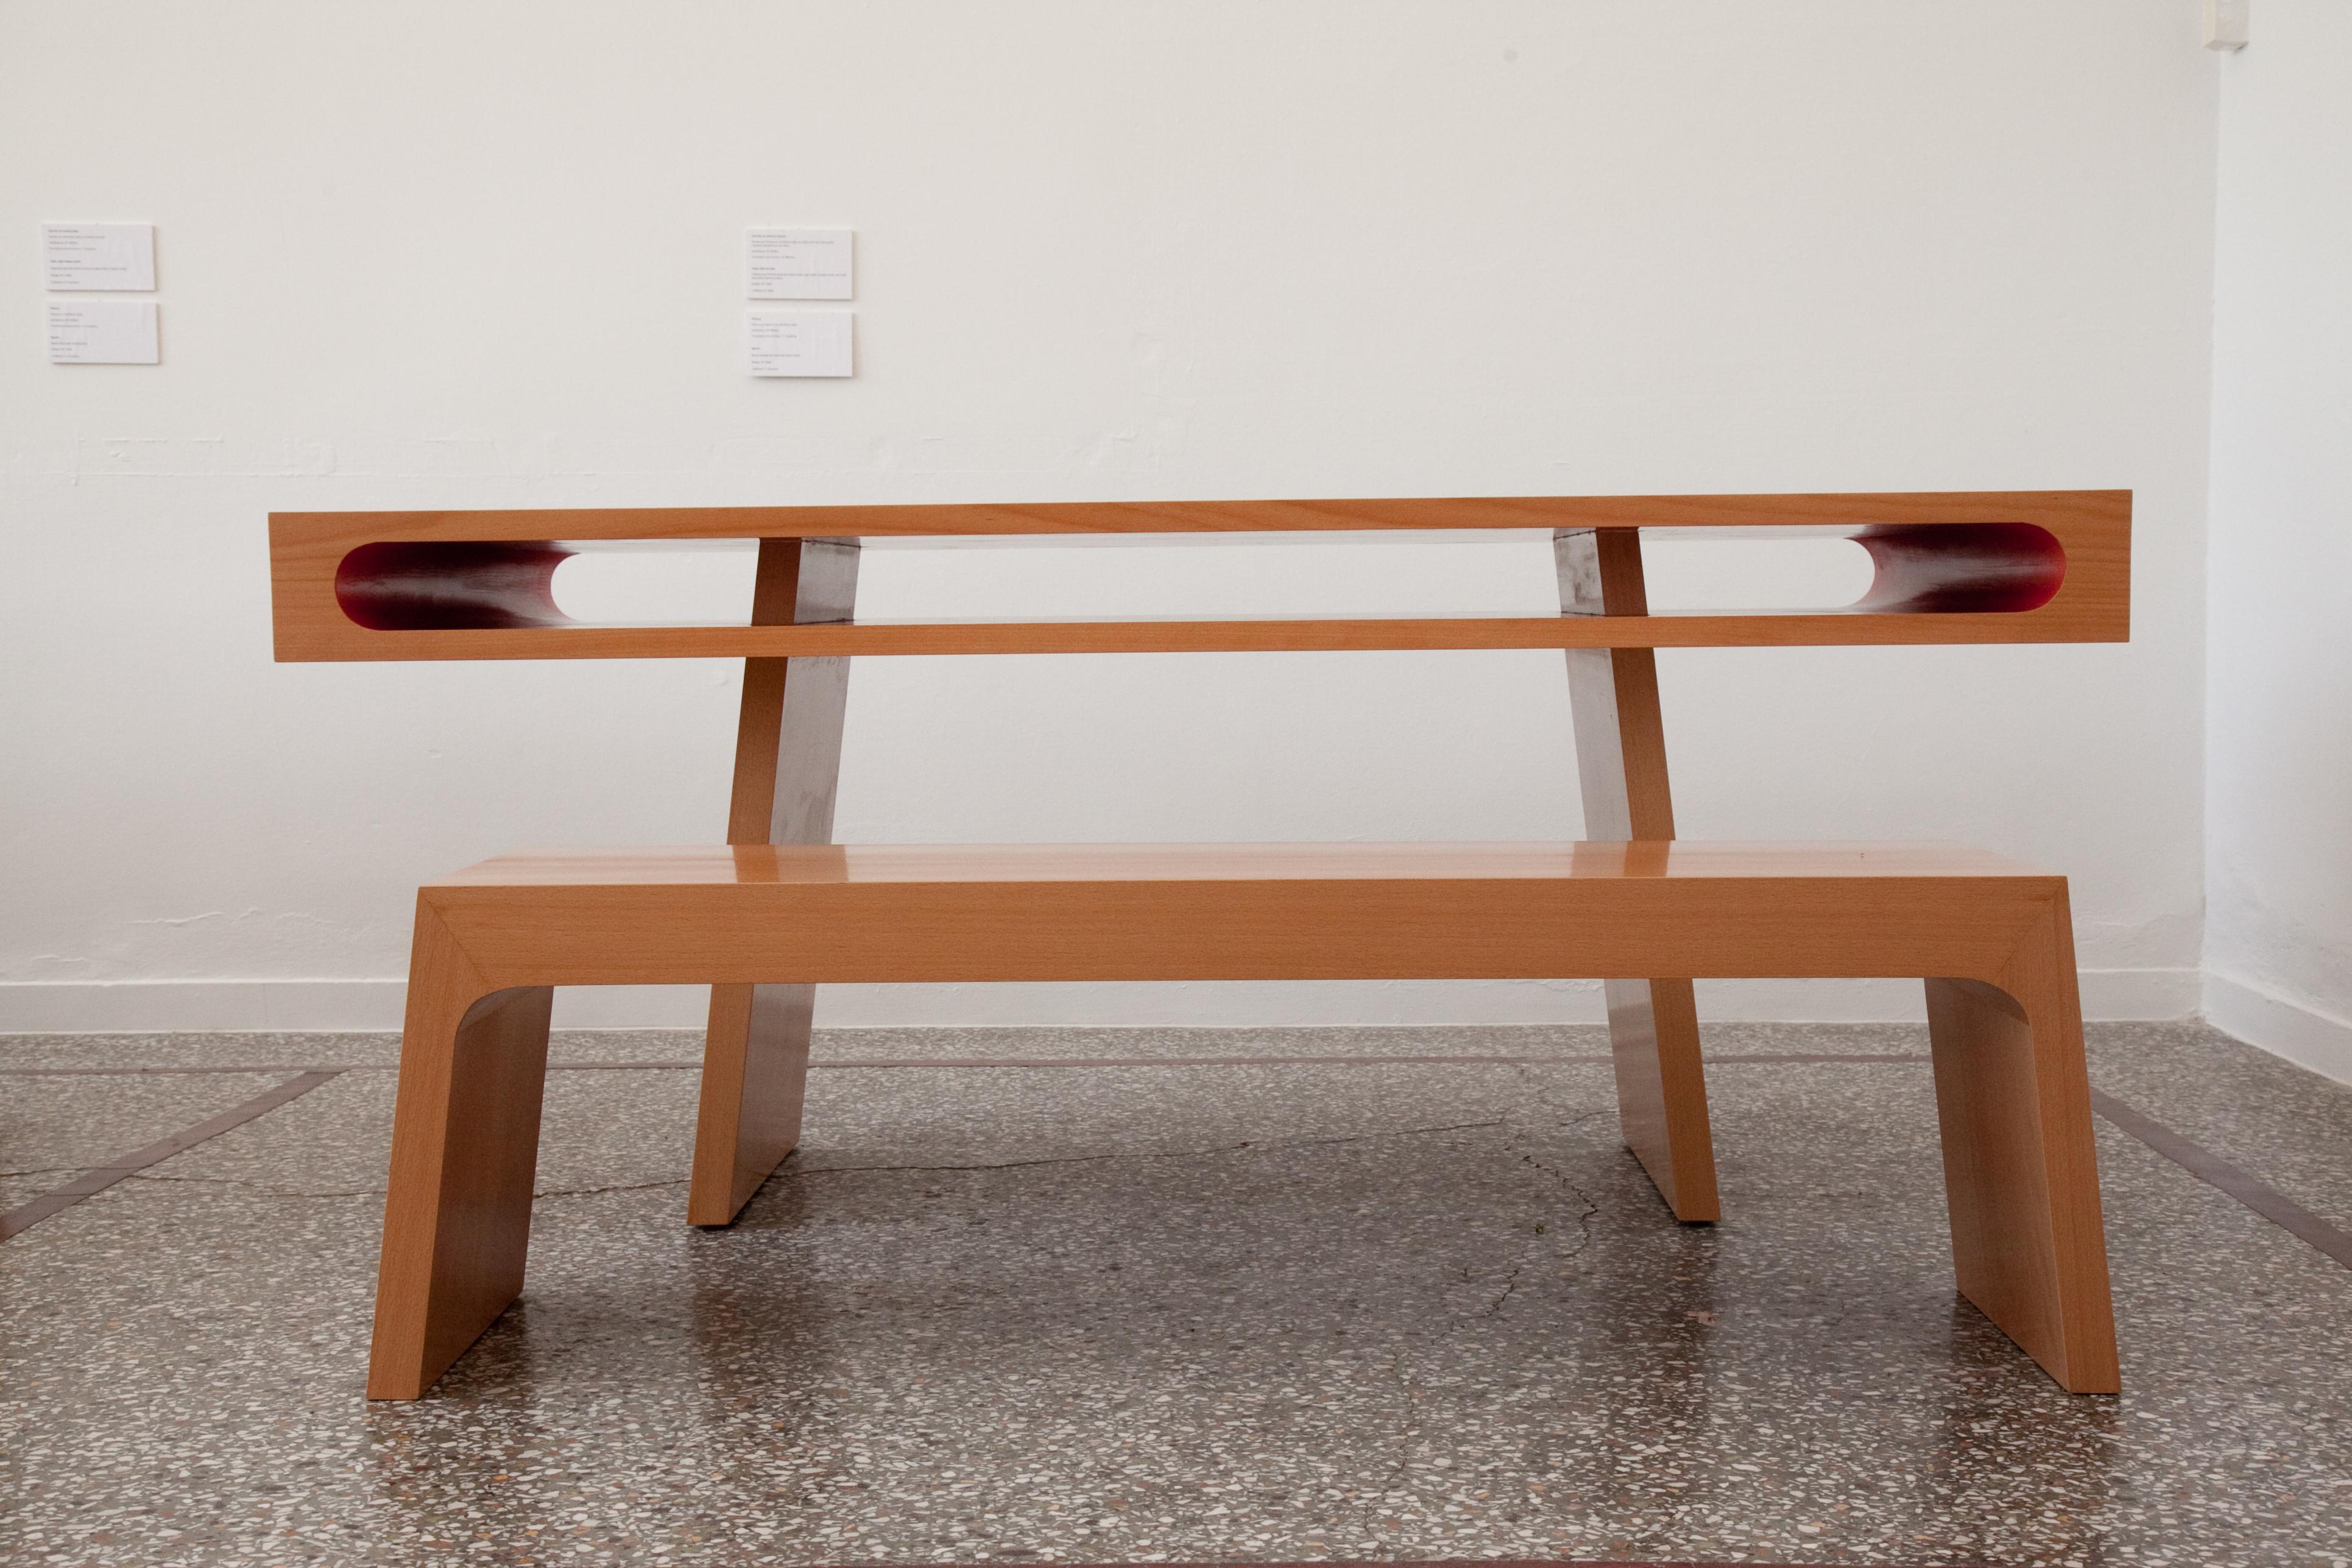 21st Century, Minimalist, European, Handmade Bench Lined with Beechwood In Excellent Condition For Sale In Tinos, Cyclades